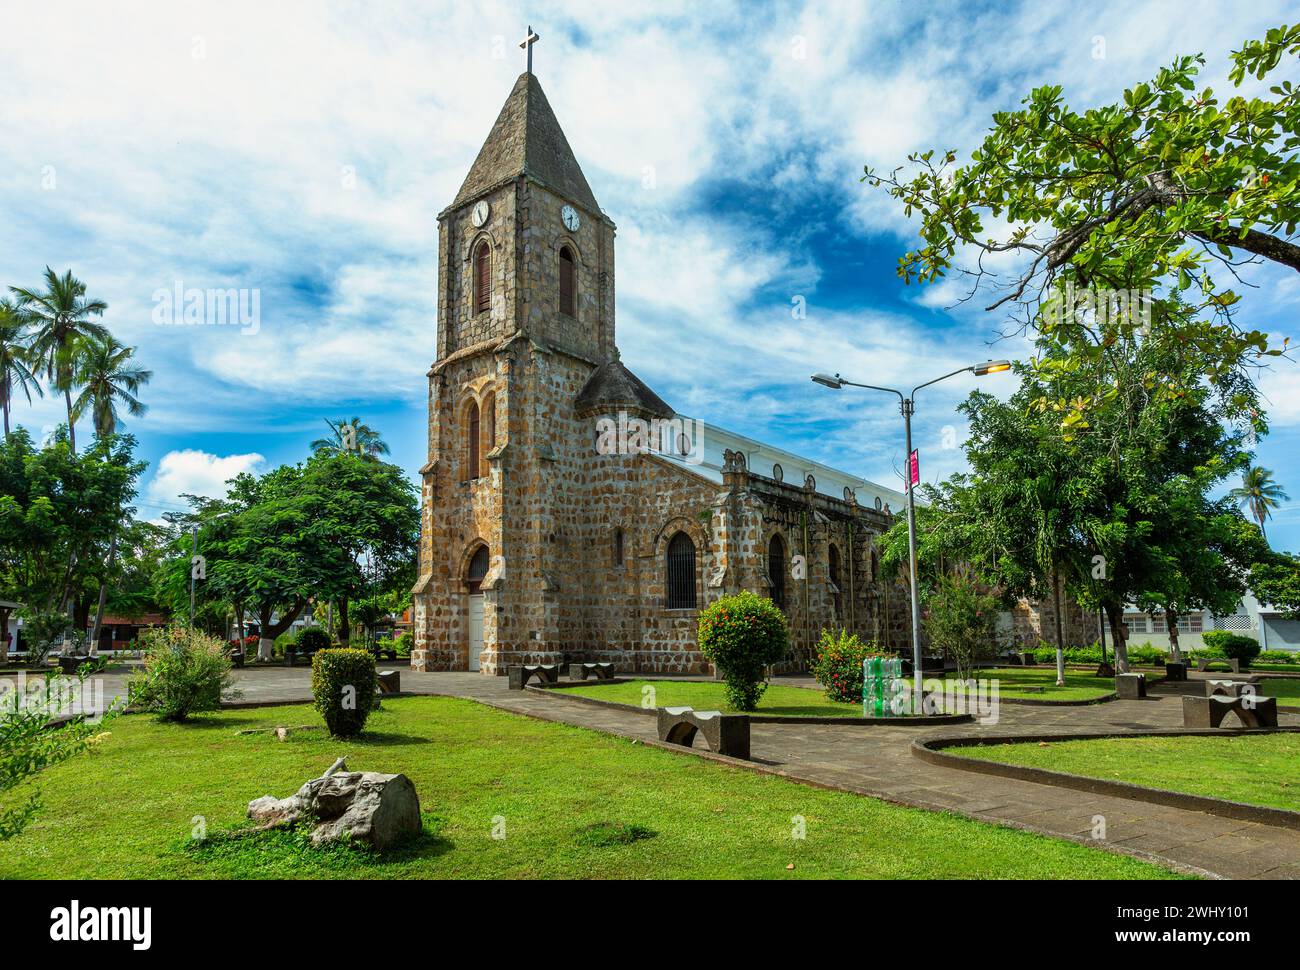 Our Lady of Mount Carmel Cathedral, Puntarenas, Costa Rica Stock Photo